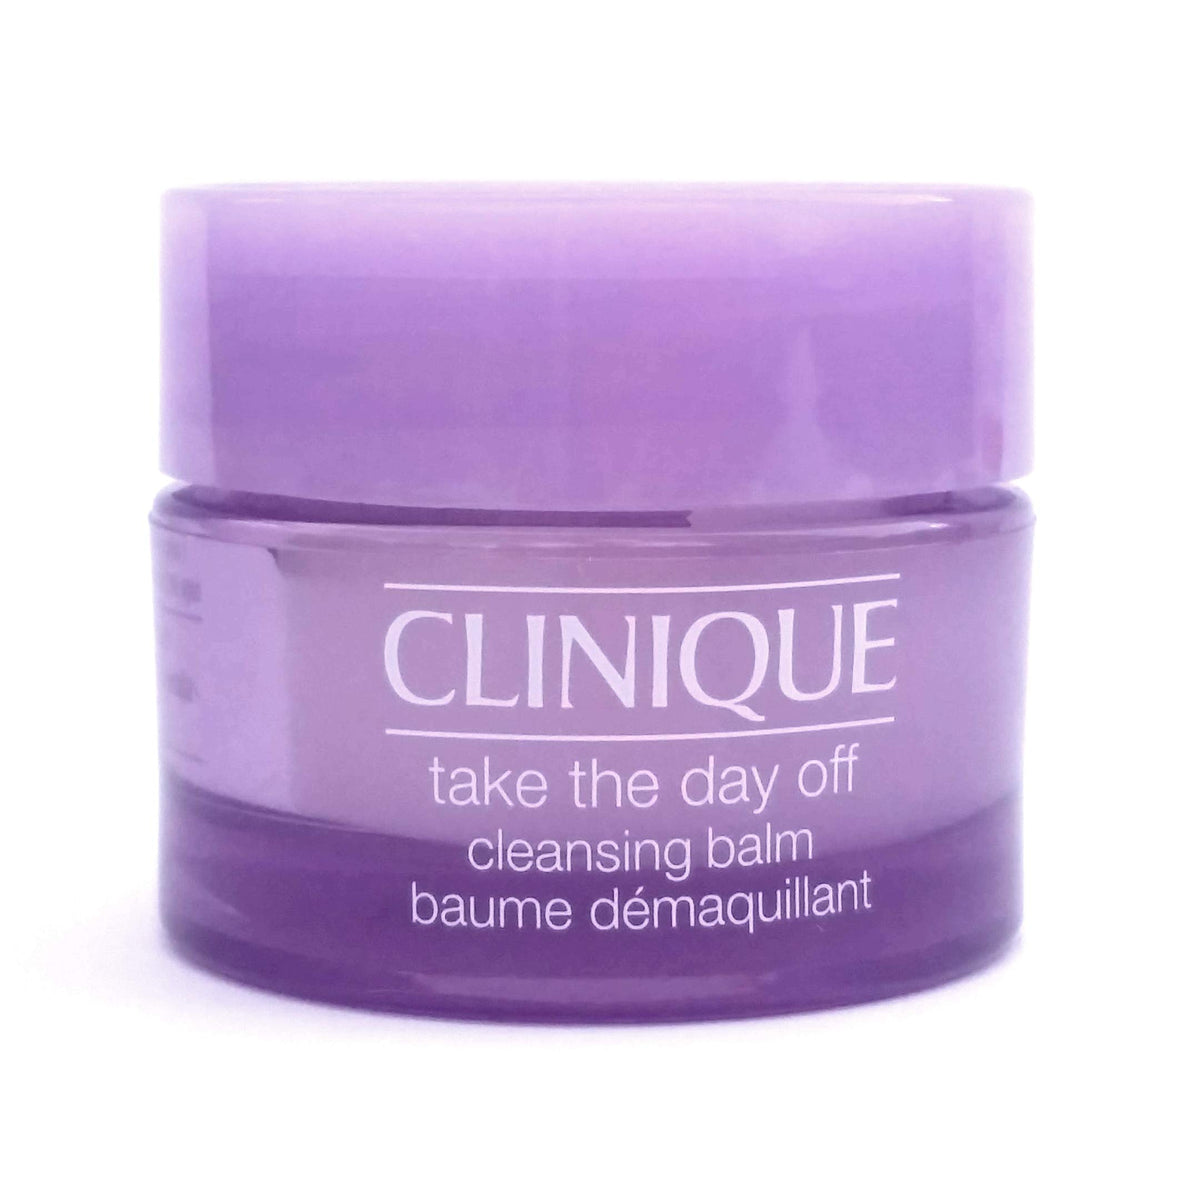 Clinique Take The Day Off Cleansing Balm Makeup Remover Makeup balm Remover Volare Makeup 15 ml  